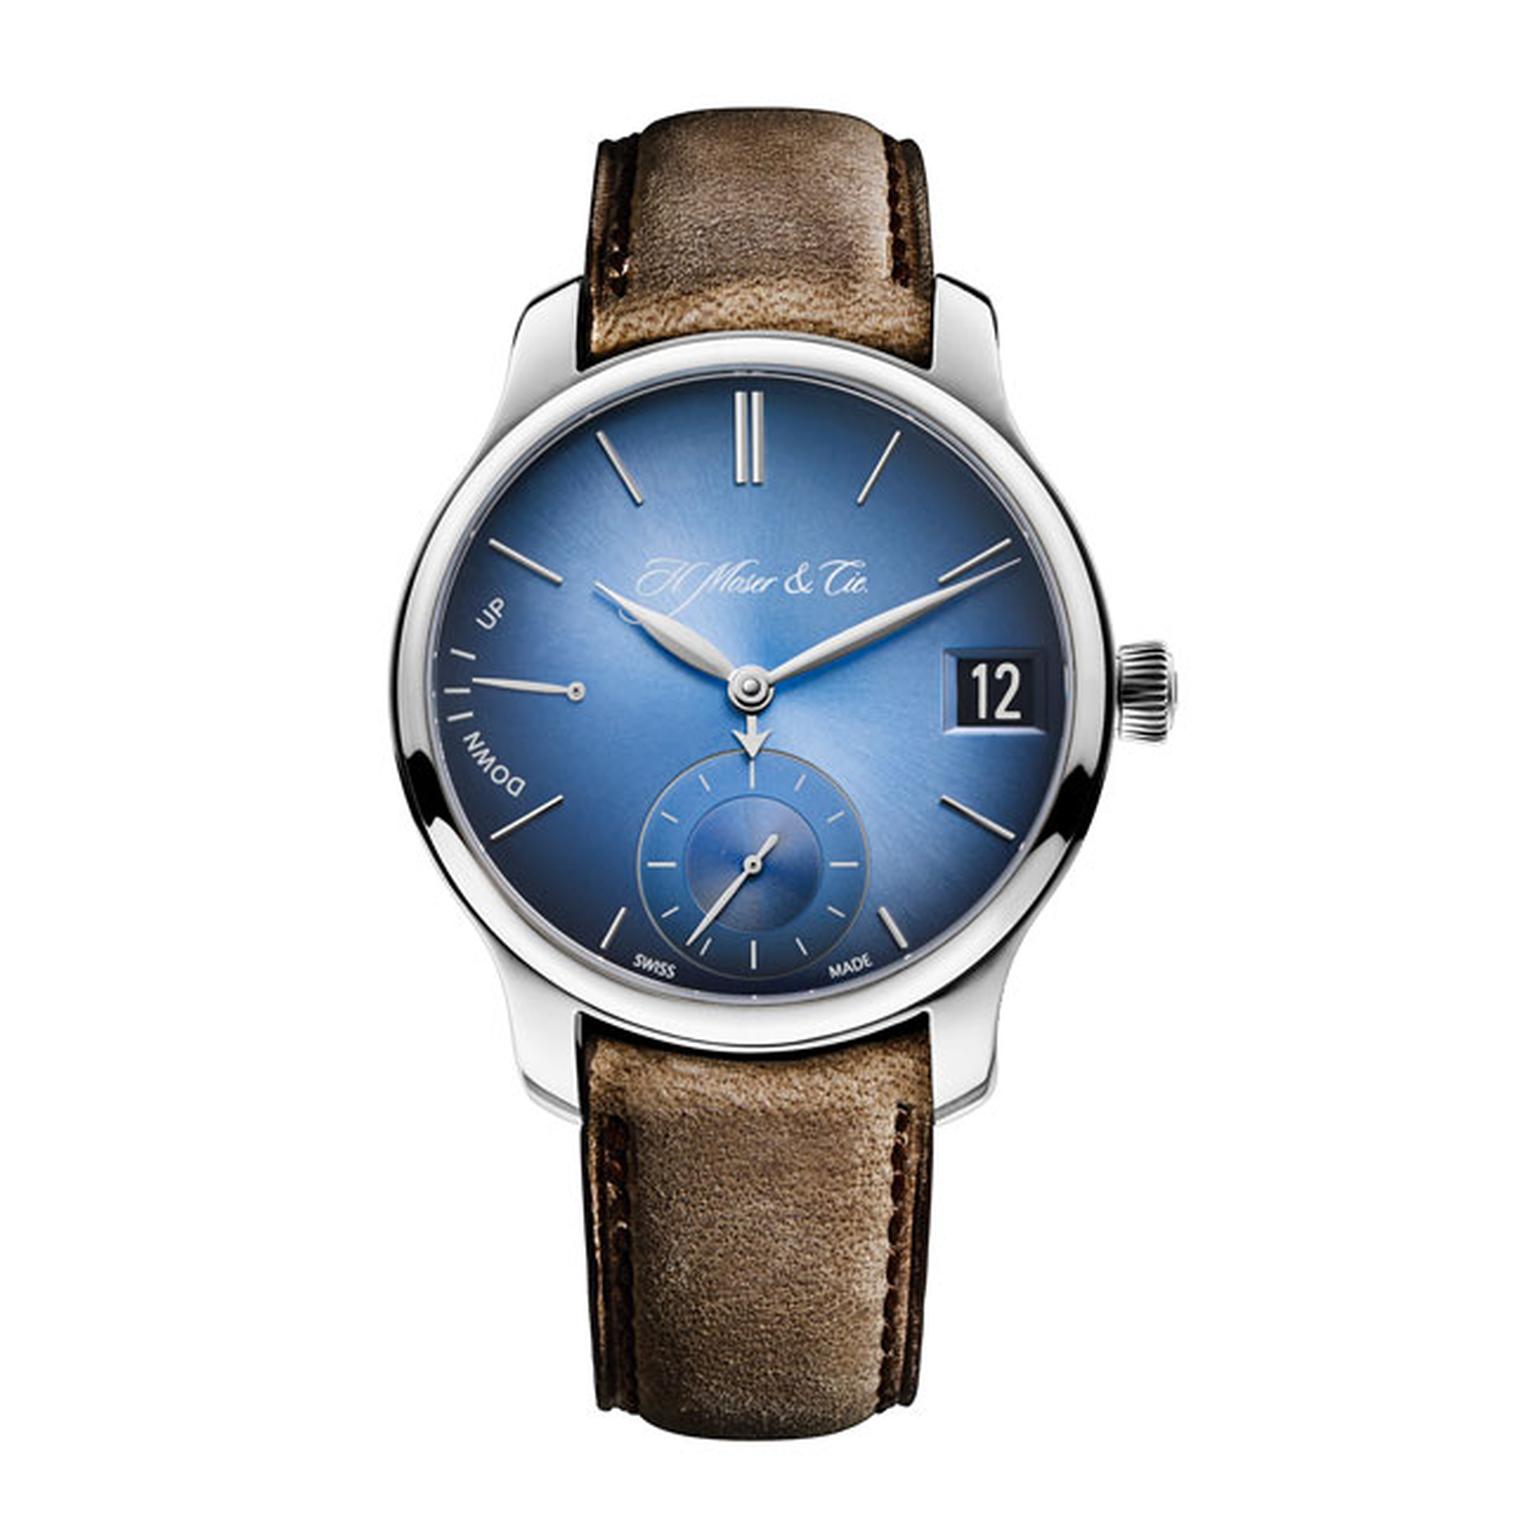 H Moser and Cie Endeavour Perpetual Calendar Funky Blue watch_main